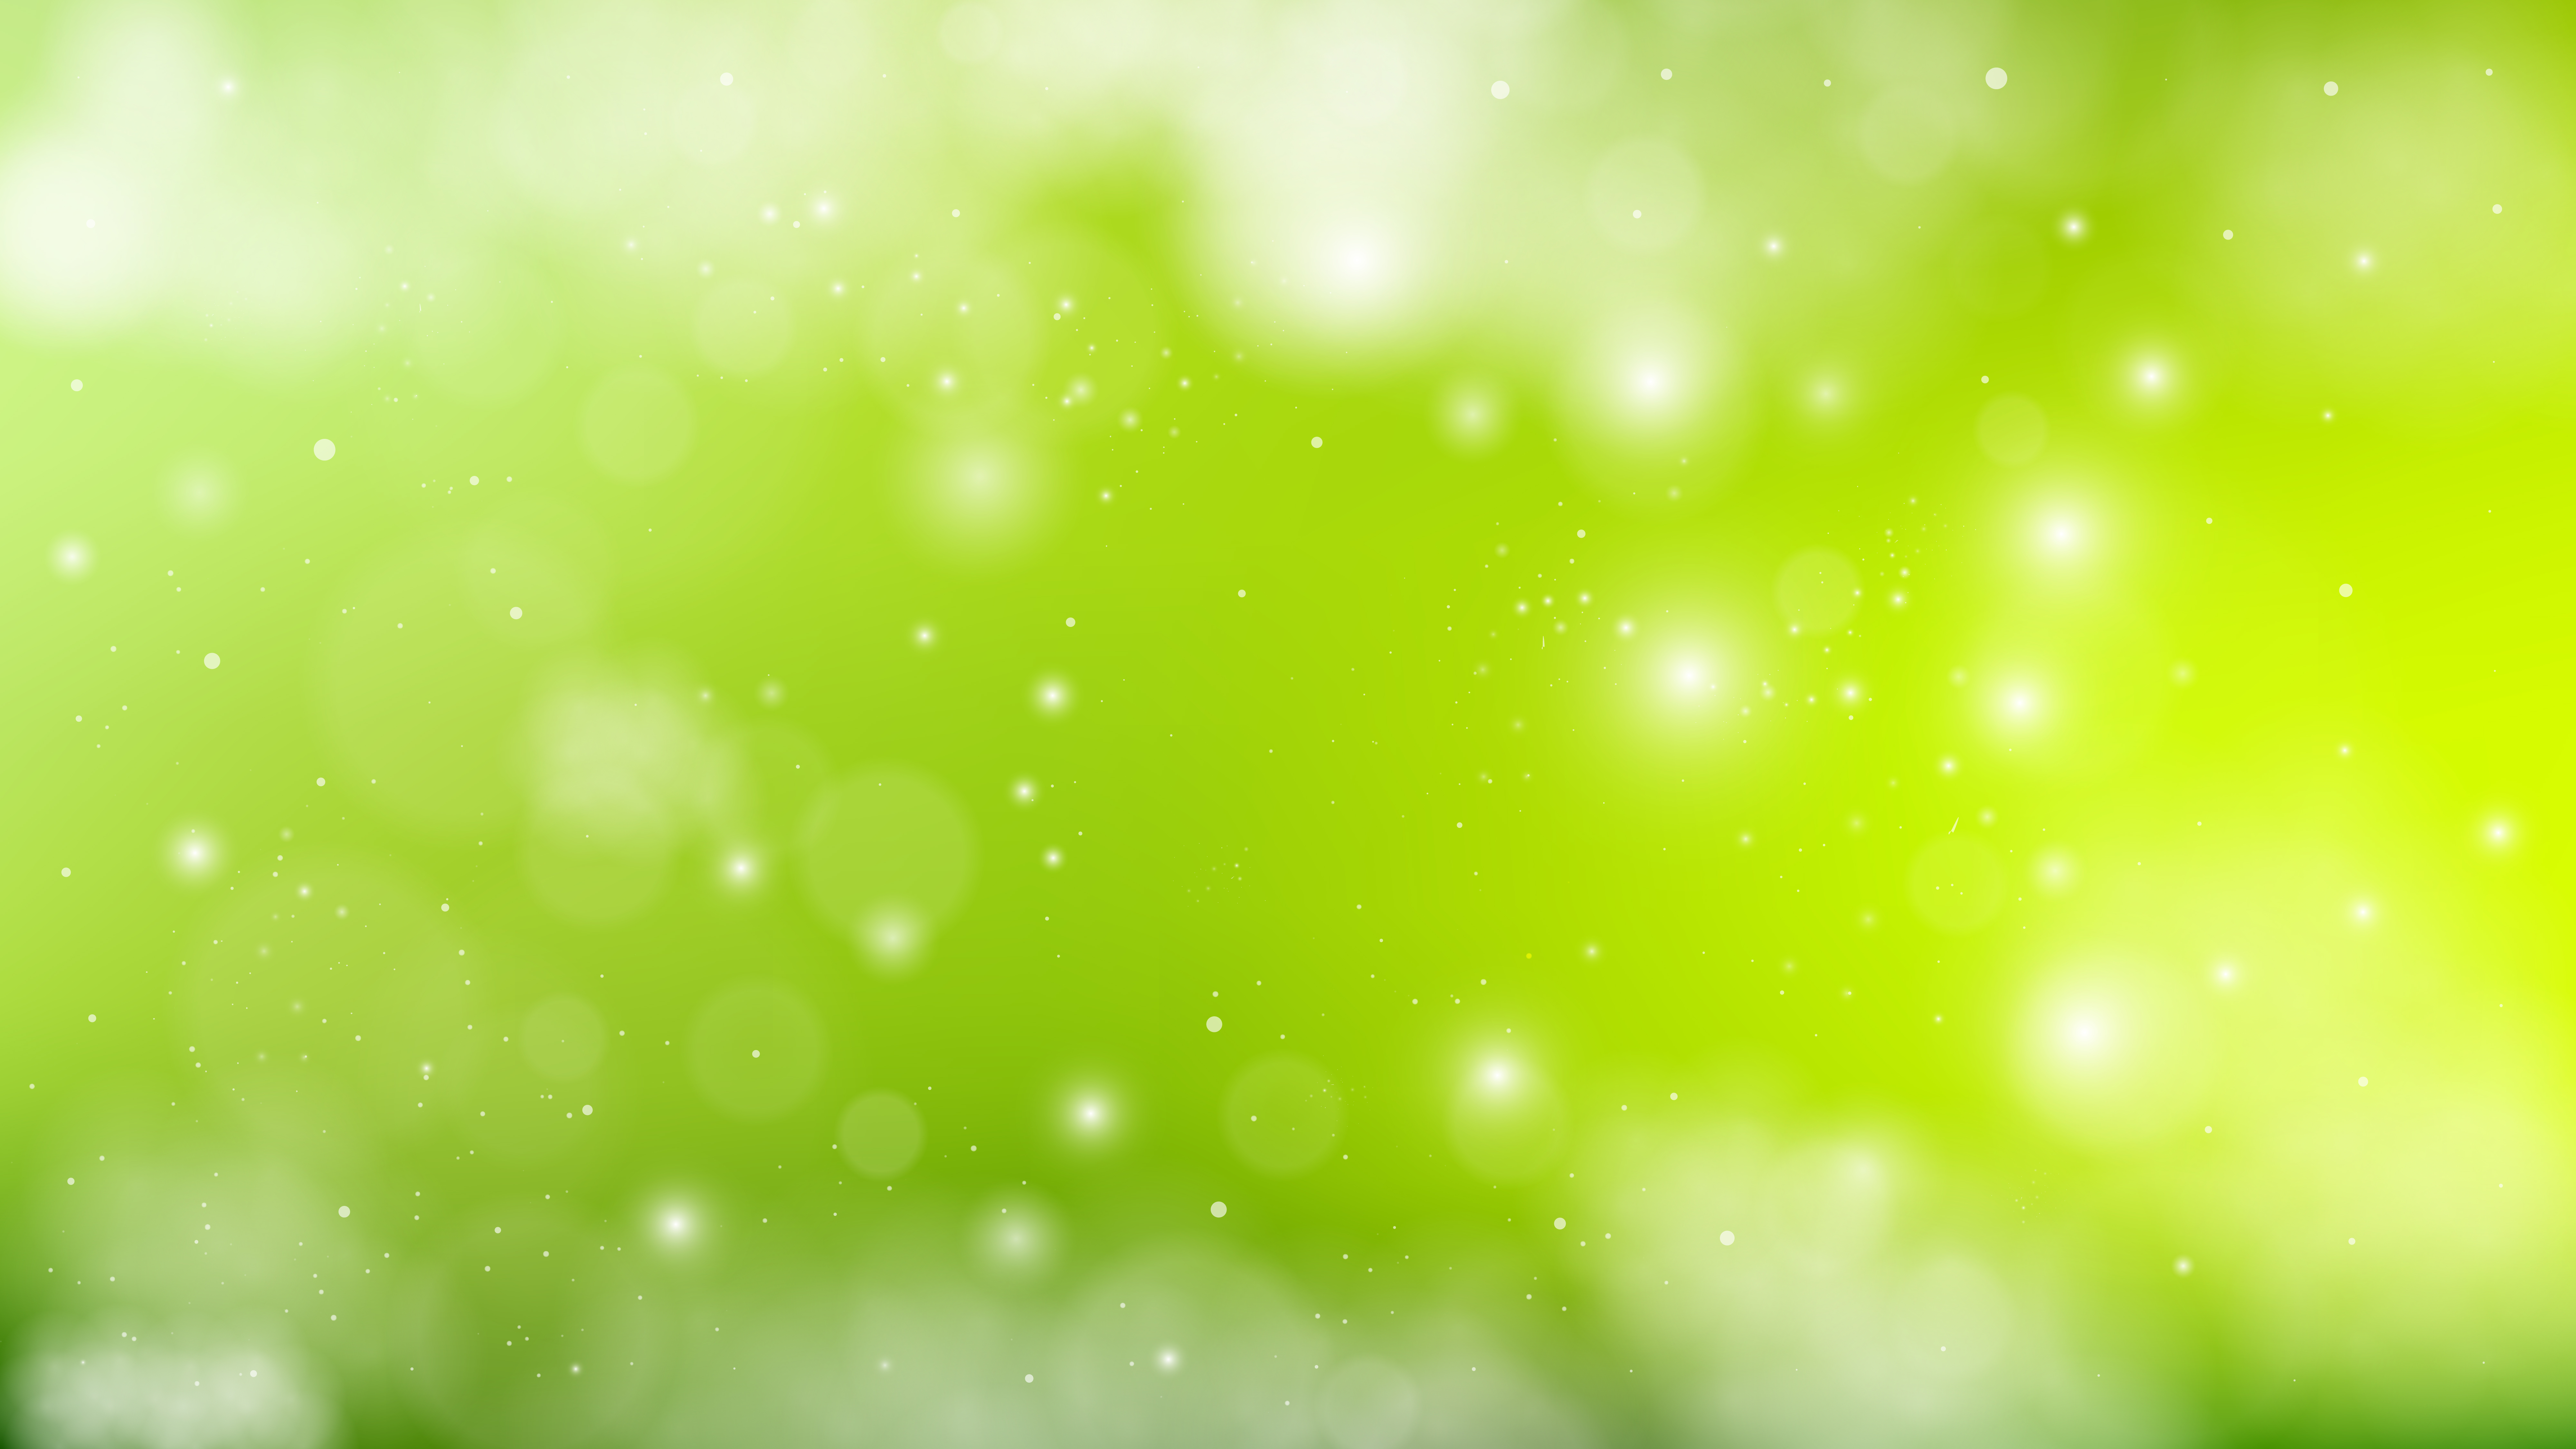 Free Abstract Lime Green Blurred Lights Background Vector